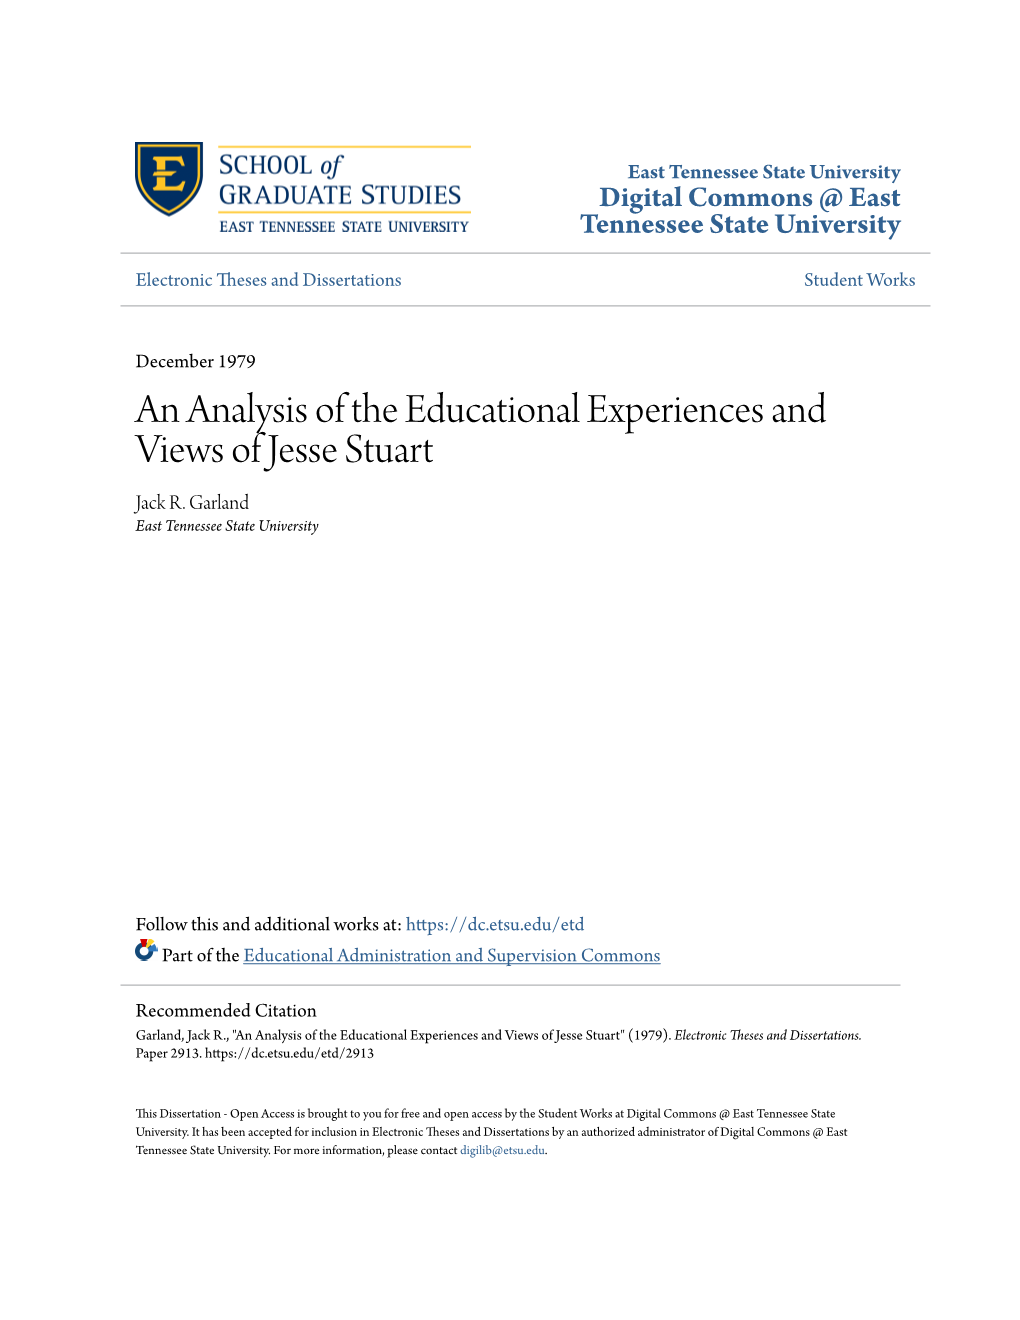 An Analysis of the Educational Experiences and Views of Jesse Stuart Jack R